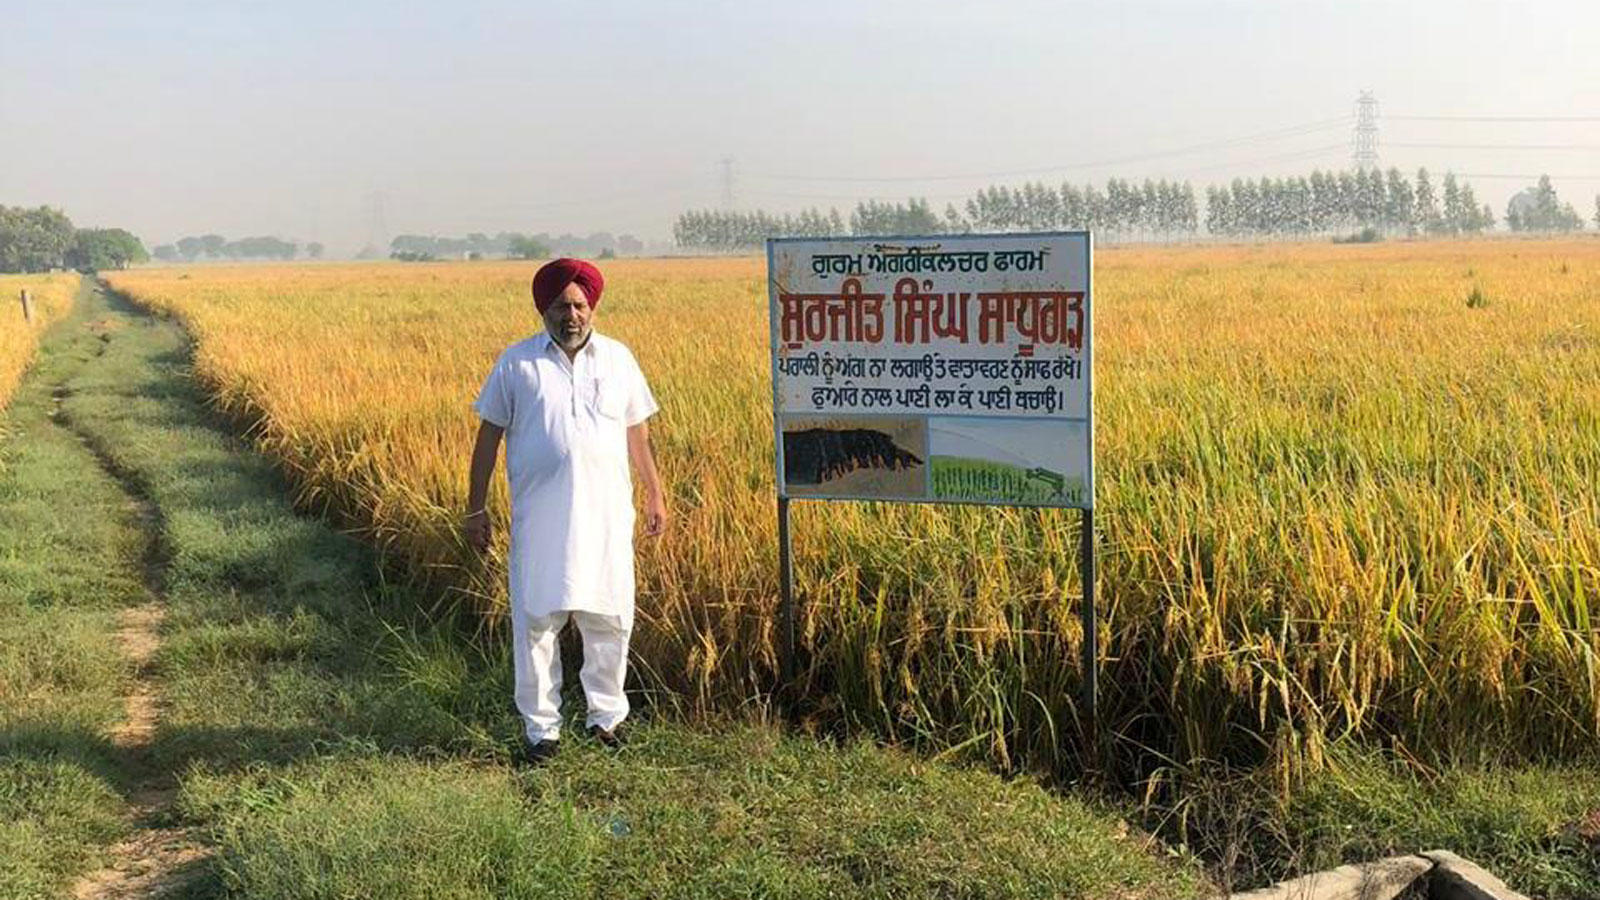 Eco-friendly farmers in 'model' Punjab village don't burn crop. This is  what they're doing instead - Times of India